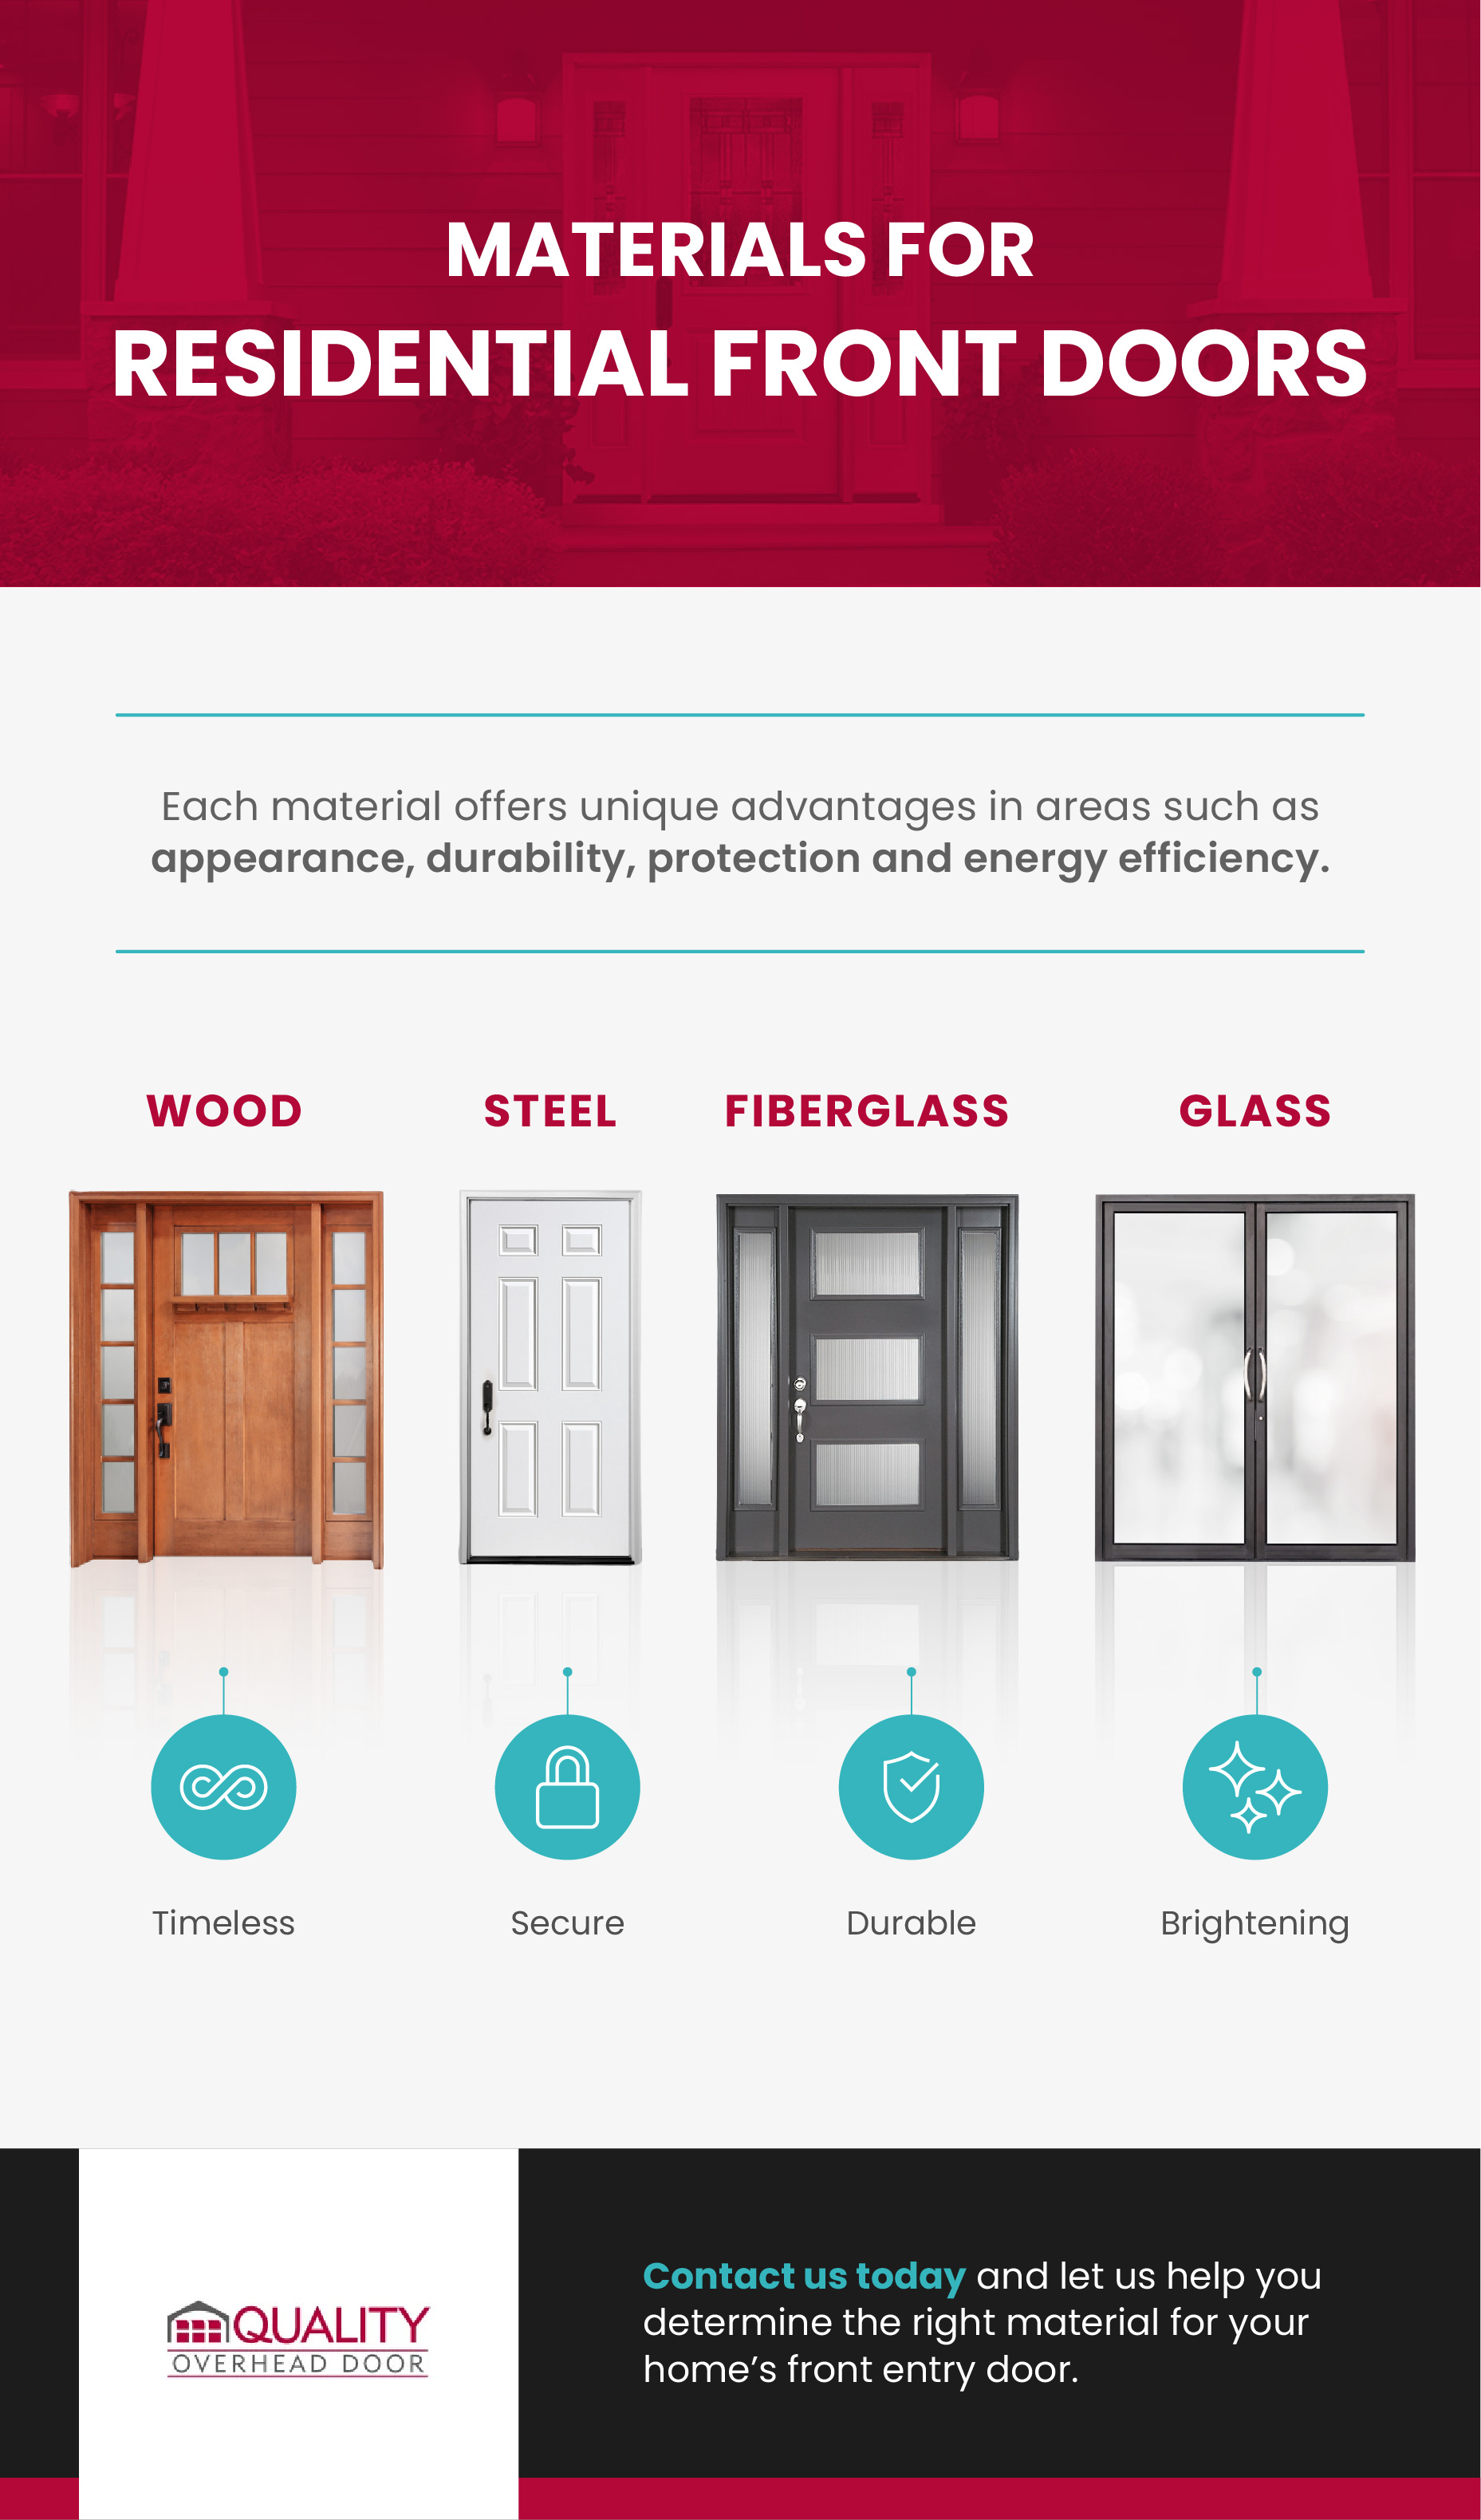 How to Choose the Right Fiberglass Entry Door